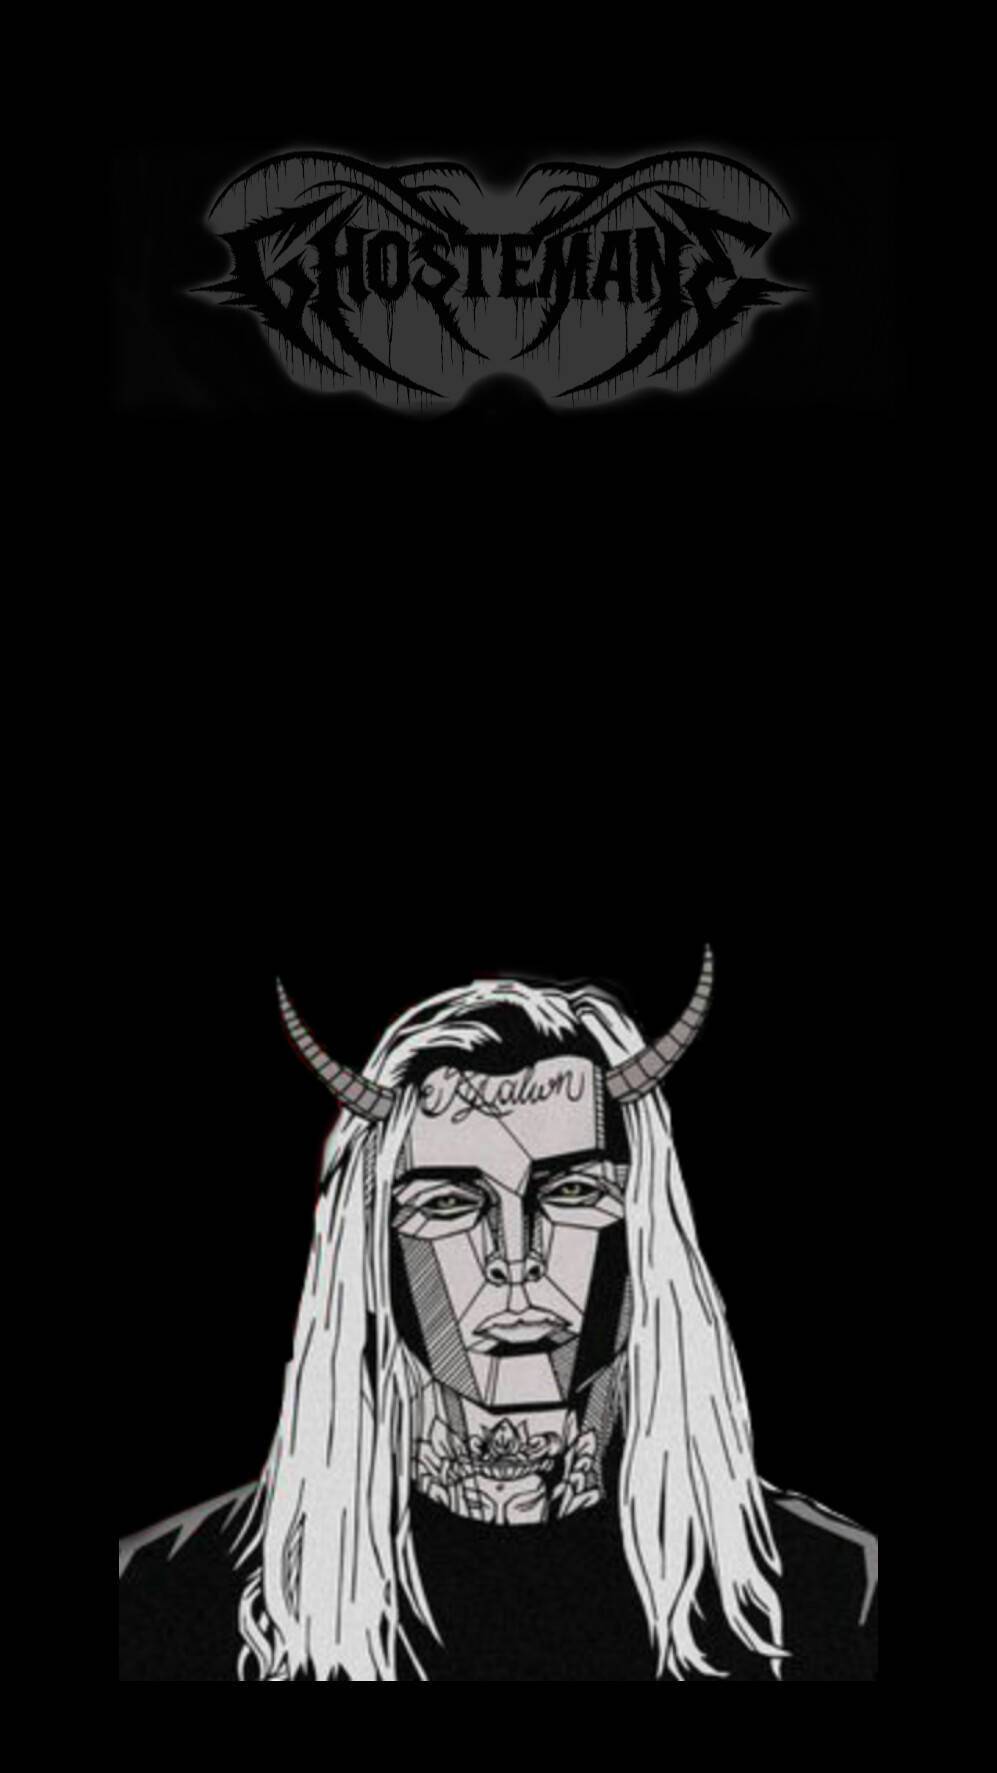 Greyscale Ghostemane Low Poly Art